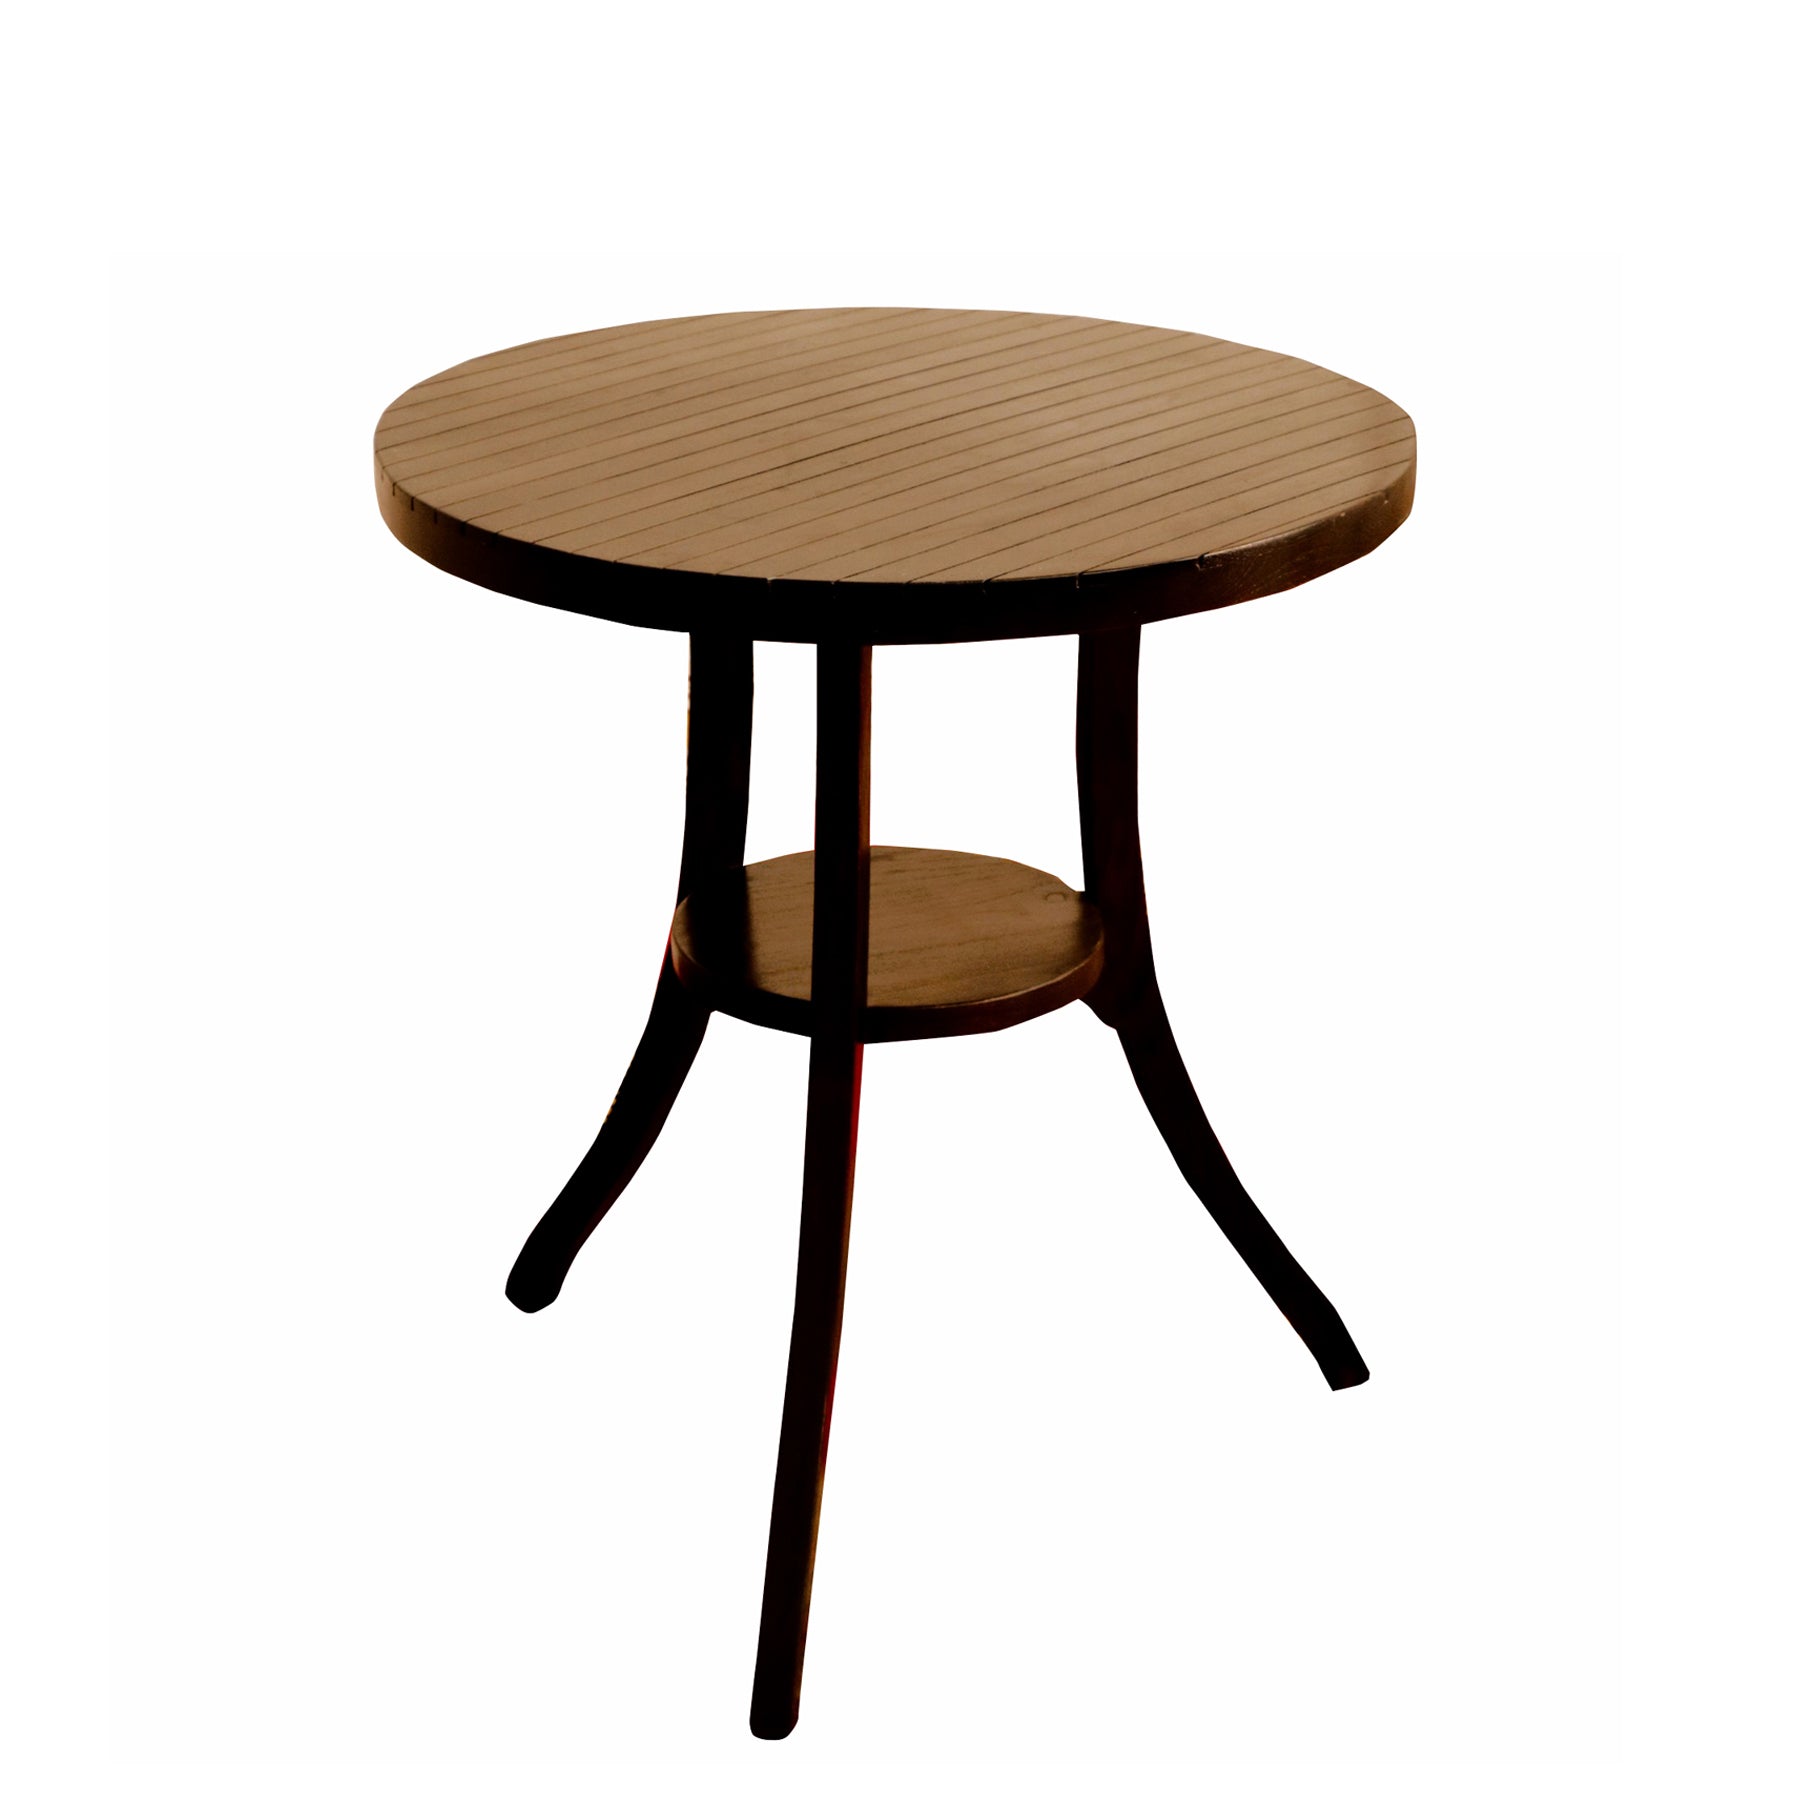 Top Mid Round Corner Table With Dark Finish Dining Table